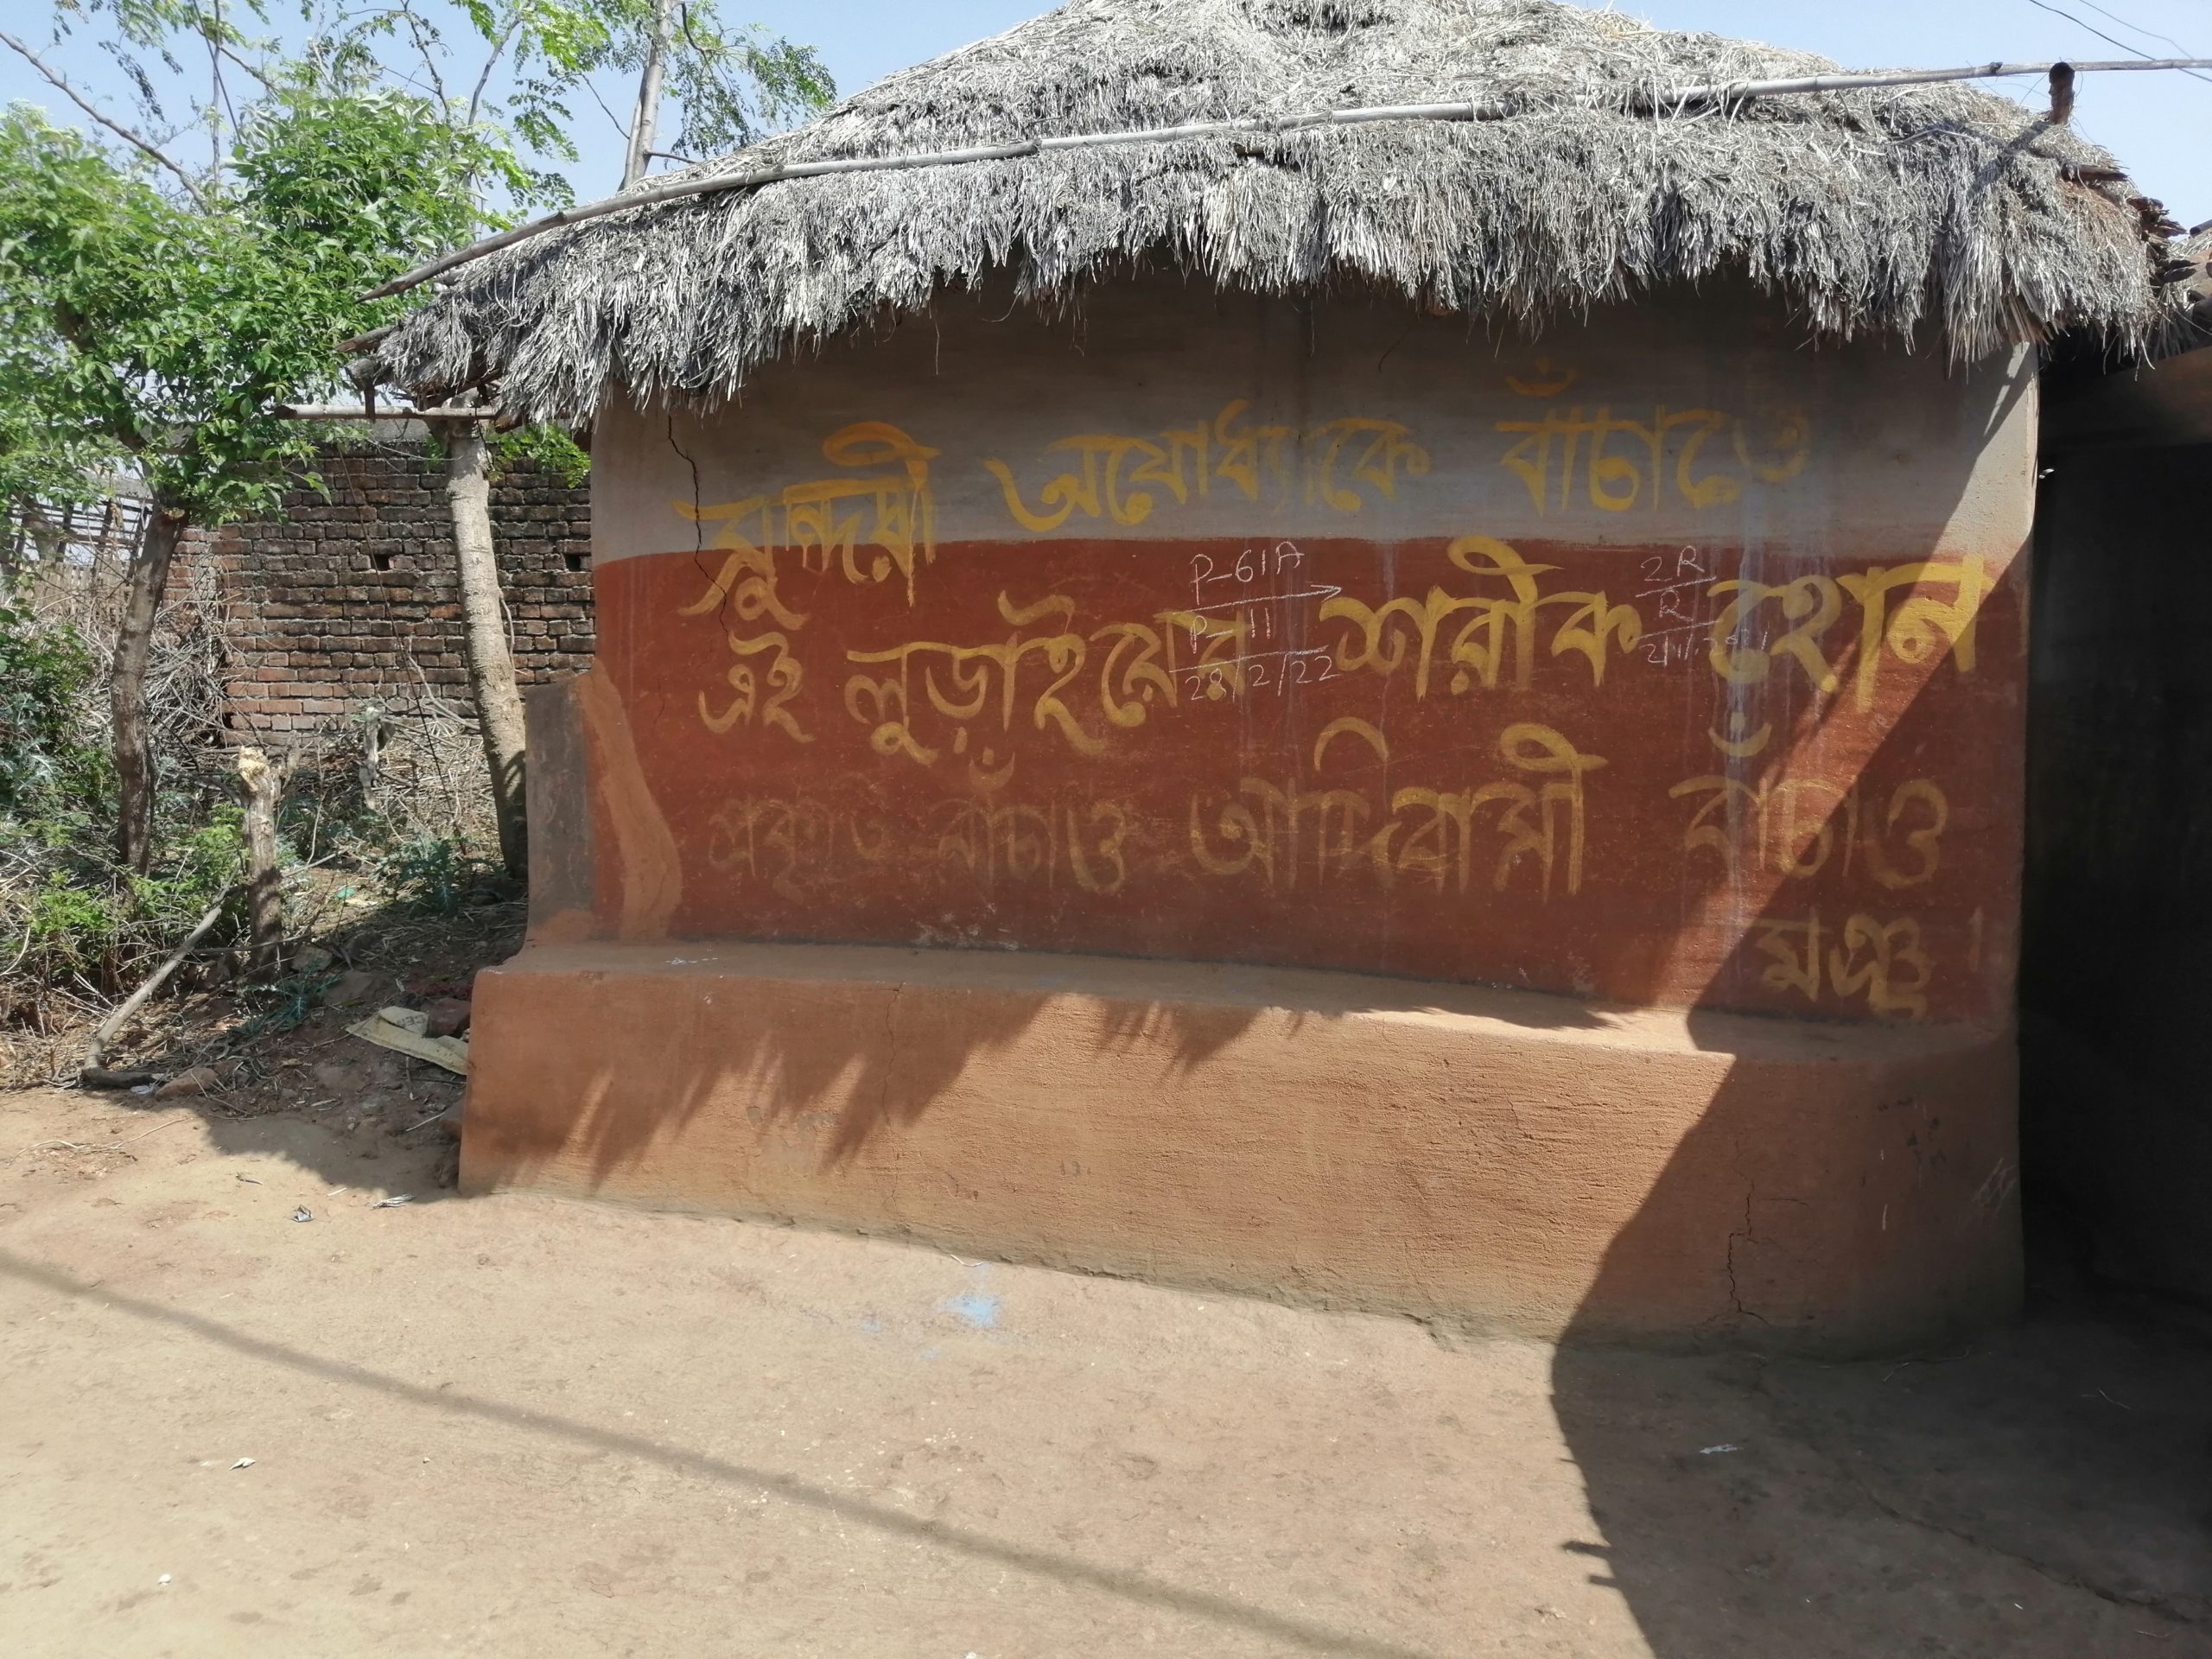 A house in Ranga village painted with a message protesting the Turga Pumped Storage Project